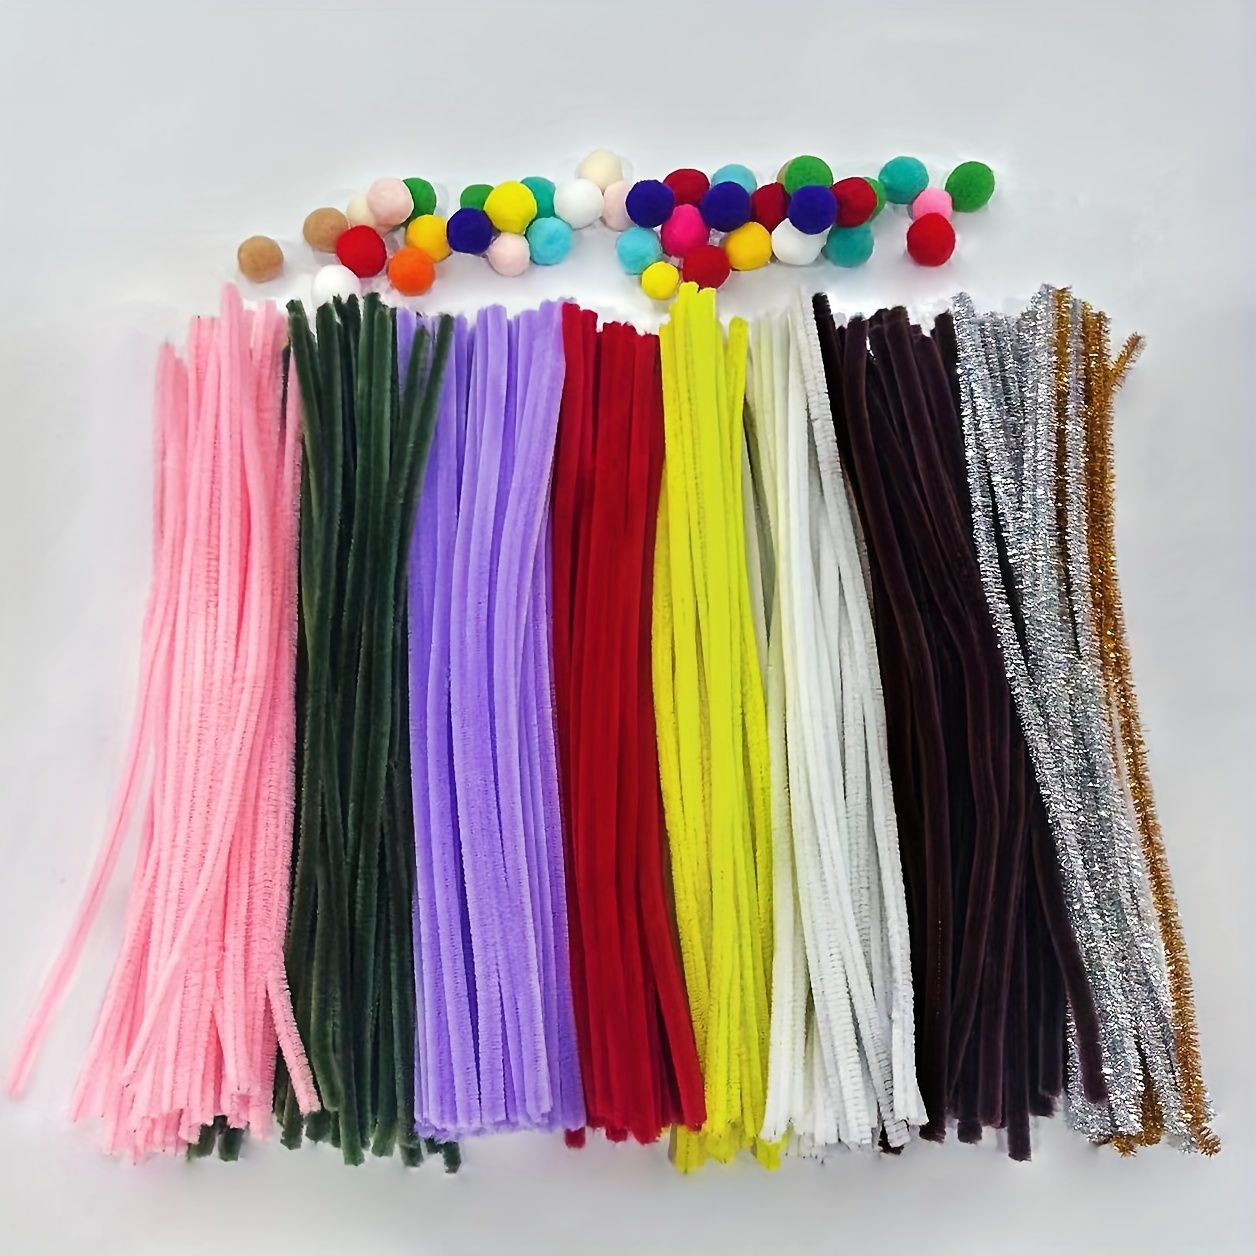 CRAFTUS 200Pcs Pipe Cleaners 20 Assorted Colors, 12 inch Long Fuzzy Craft  Pipe Cleaners for DIY Art & Craft Supplies, Chenille Stems for Kids  Creative